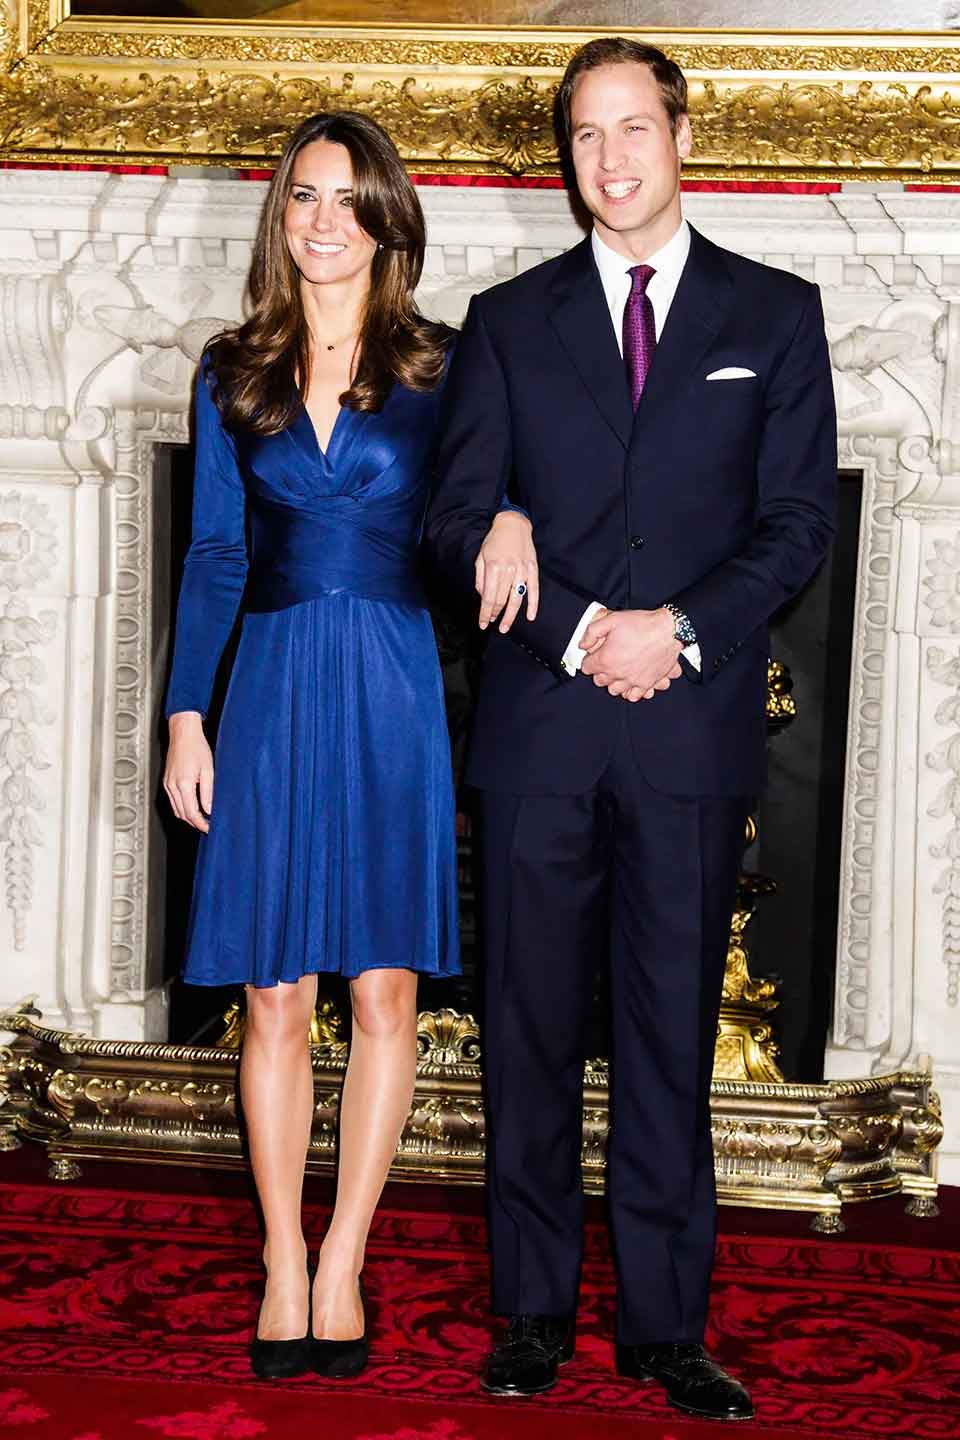 Kate Middleton is real power behind the throne